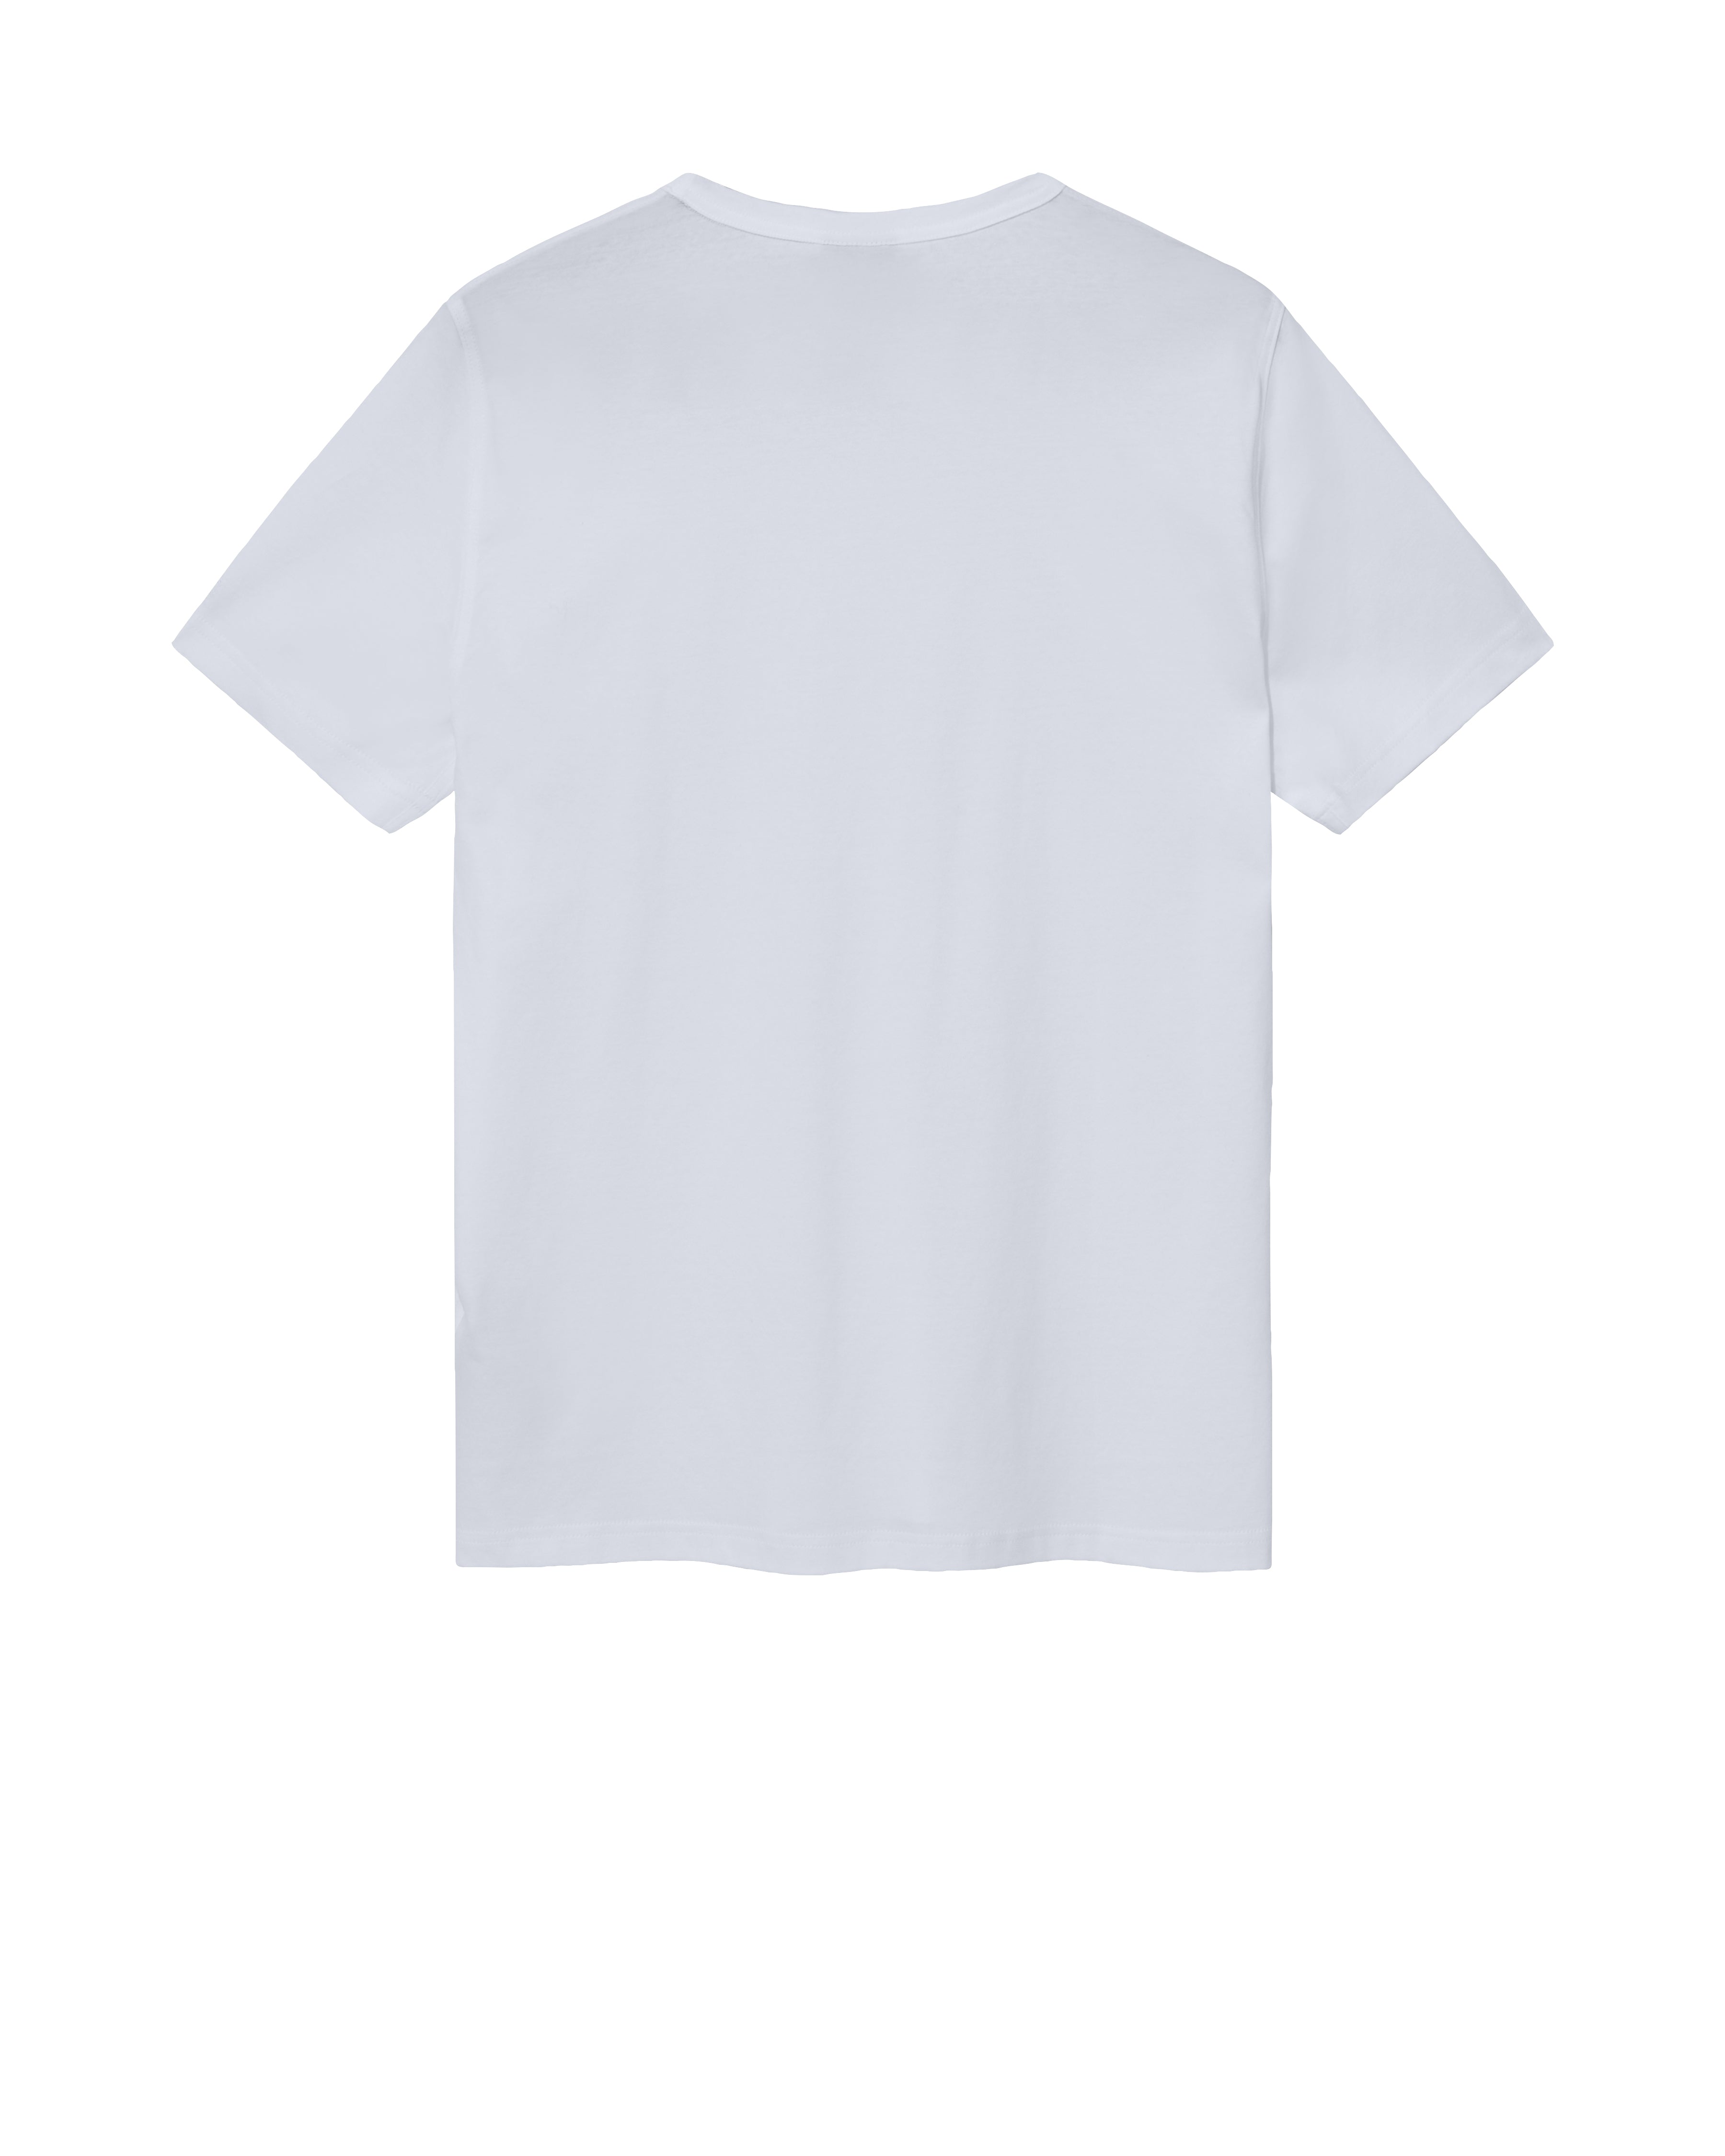 Perry Crunch O-ss Tee - White